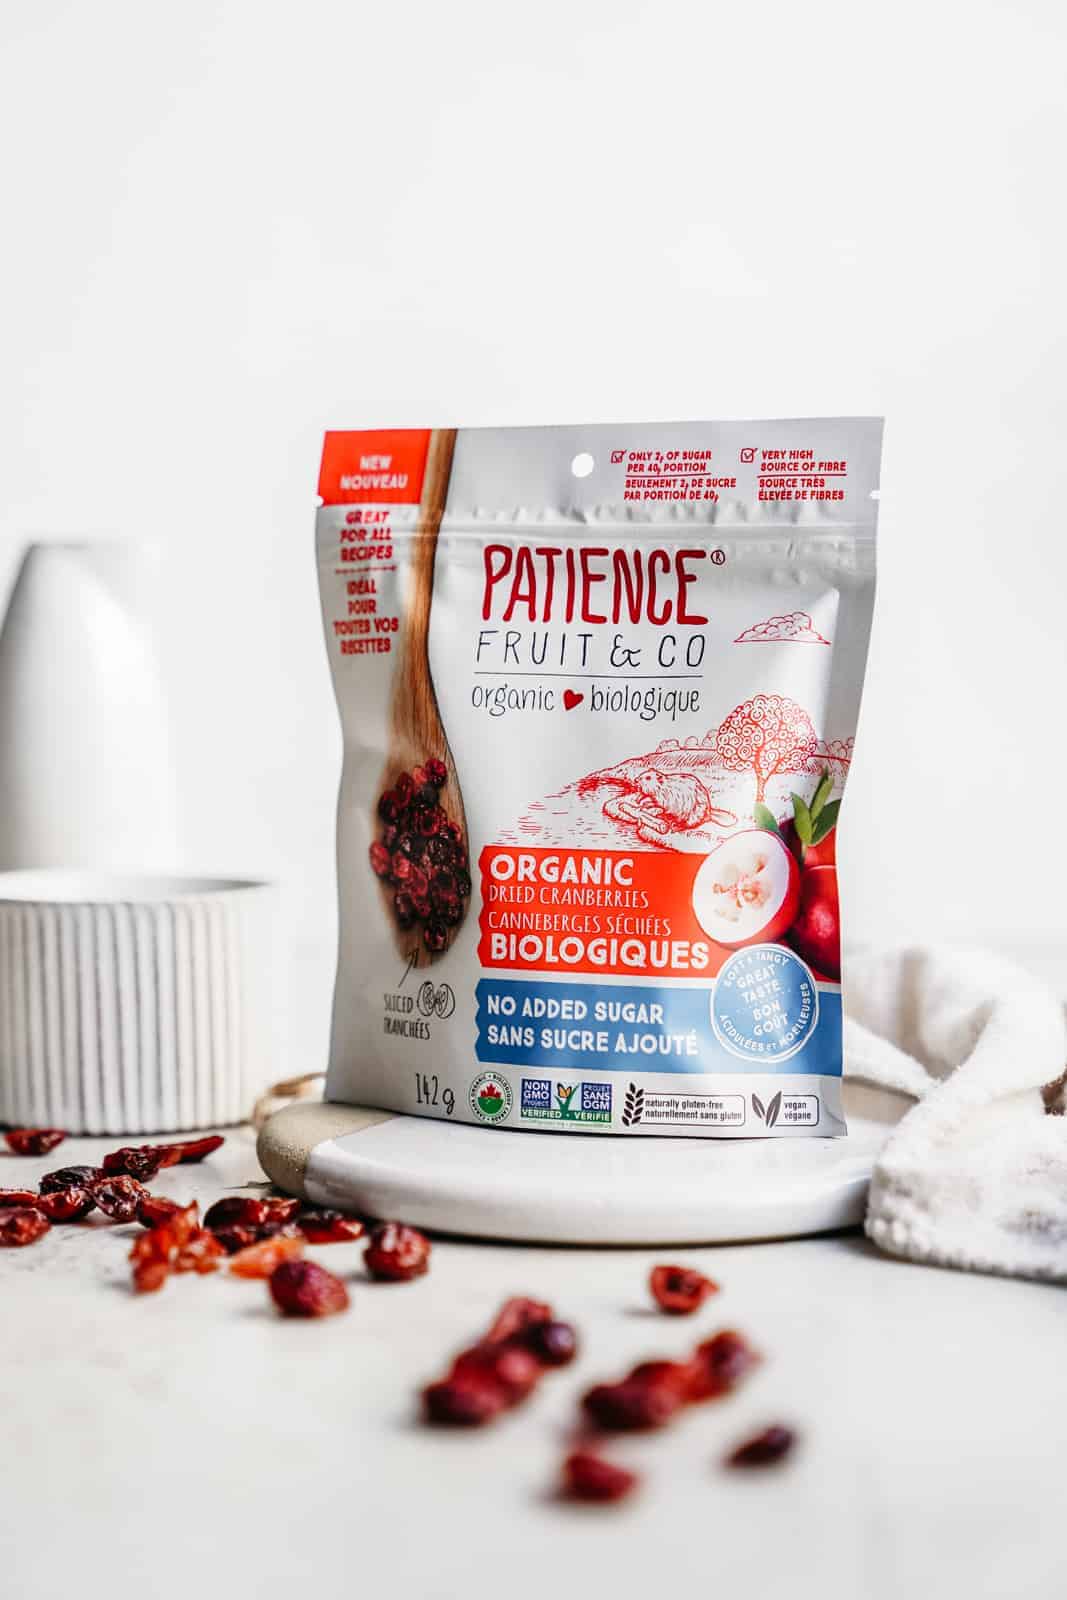 Bag of Patience Fruit & Co. dried cranberries on countertop with some cranberries scattered across counter.